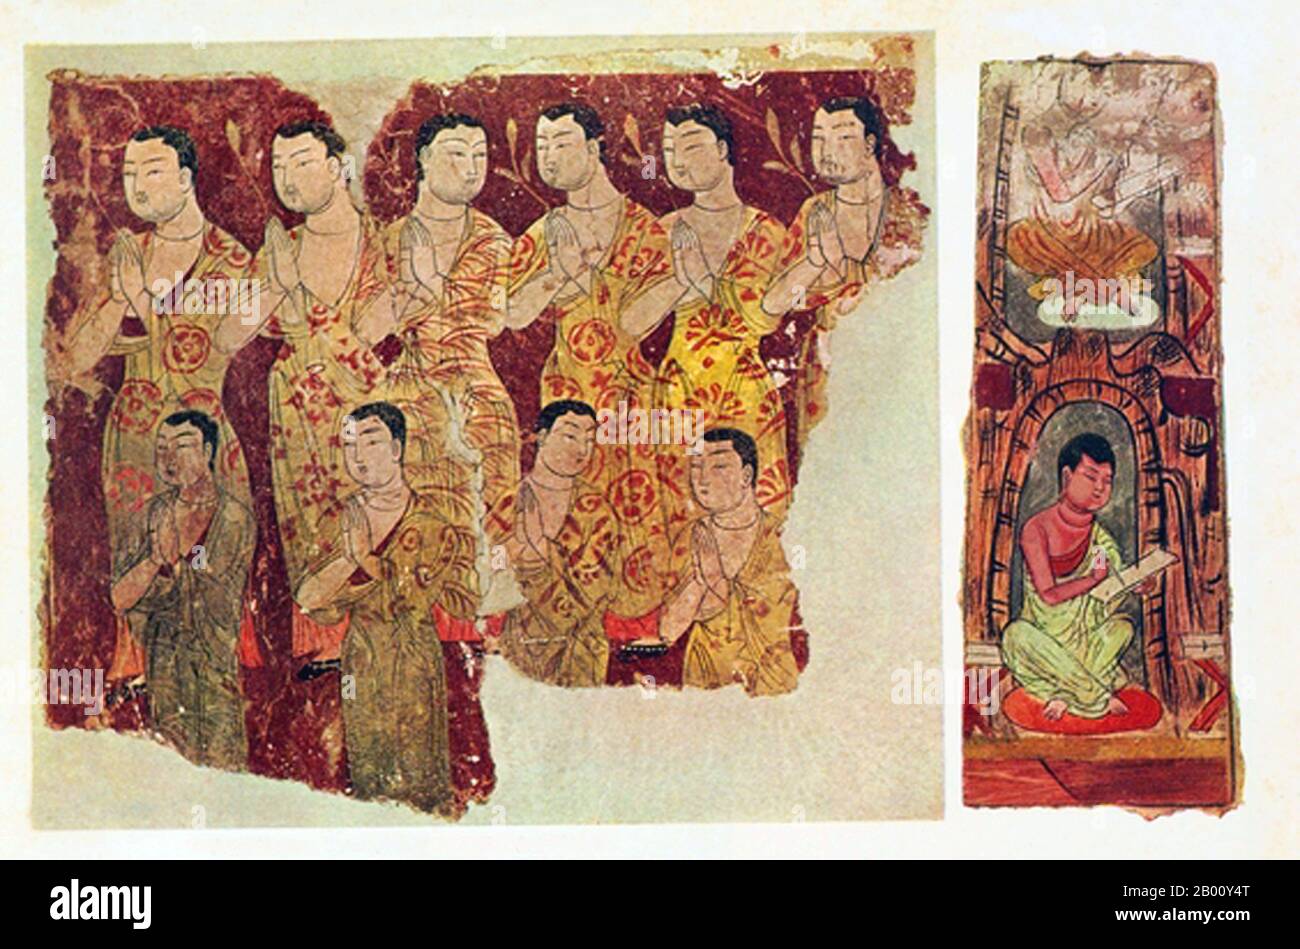 China/Silk Road: Bodhisattvas and acolytes in murals from Turfan Oasis, Xinjiang, c. 7th-8th century CE.  The Turpan Oasis was a strategically significant centre on Xinjiang’s Northern Silk Route, site of the ancient cities of Yarkhoto (Jiaohe) and Karakhoja (Gaochang). Chinese armies first entered Turpan in the 2nd century BCE, during the reign of Han Emperor Wu Di (141-87) when the oasis was a centre of Indo-European Tocharian culture.  Turpan retained a distinctly Buddhist character until the time of the Chagatai Khanate in the 13th century, when Islam gradually became the dominant religion Stock Photo